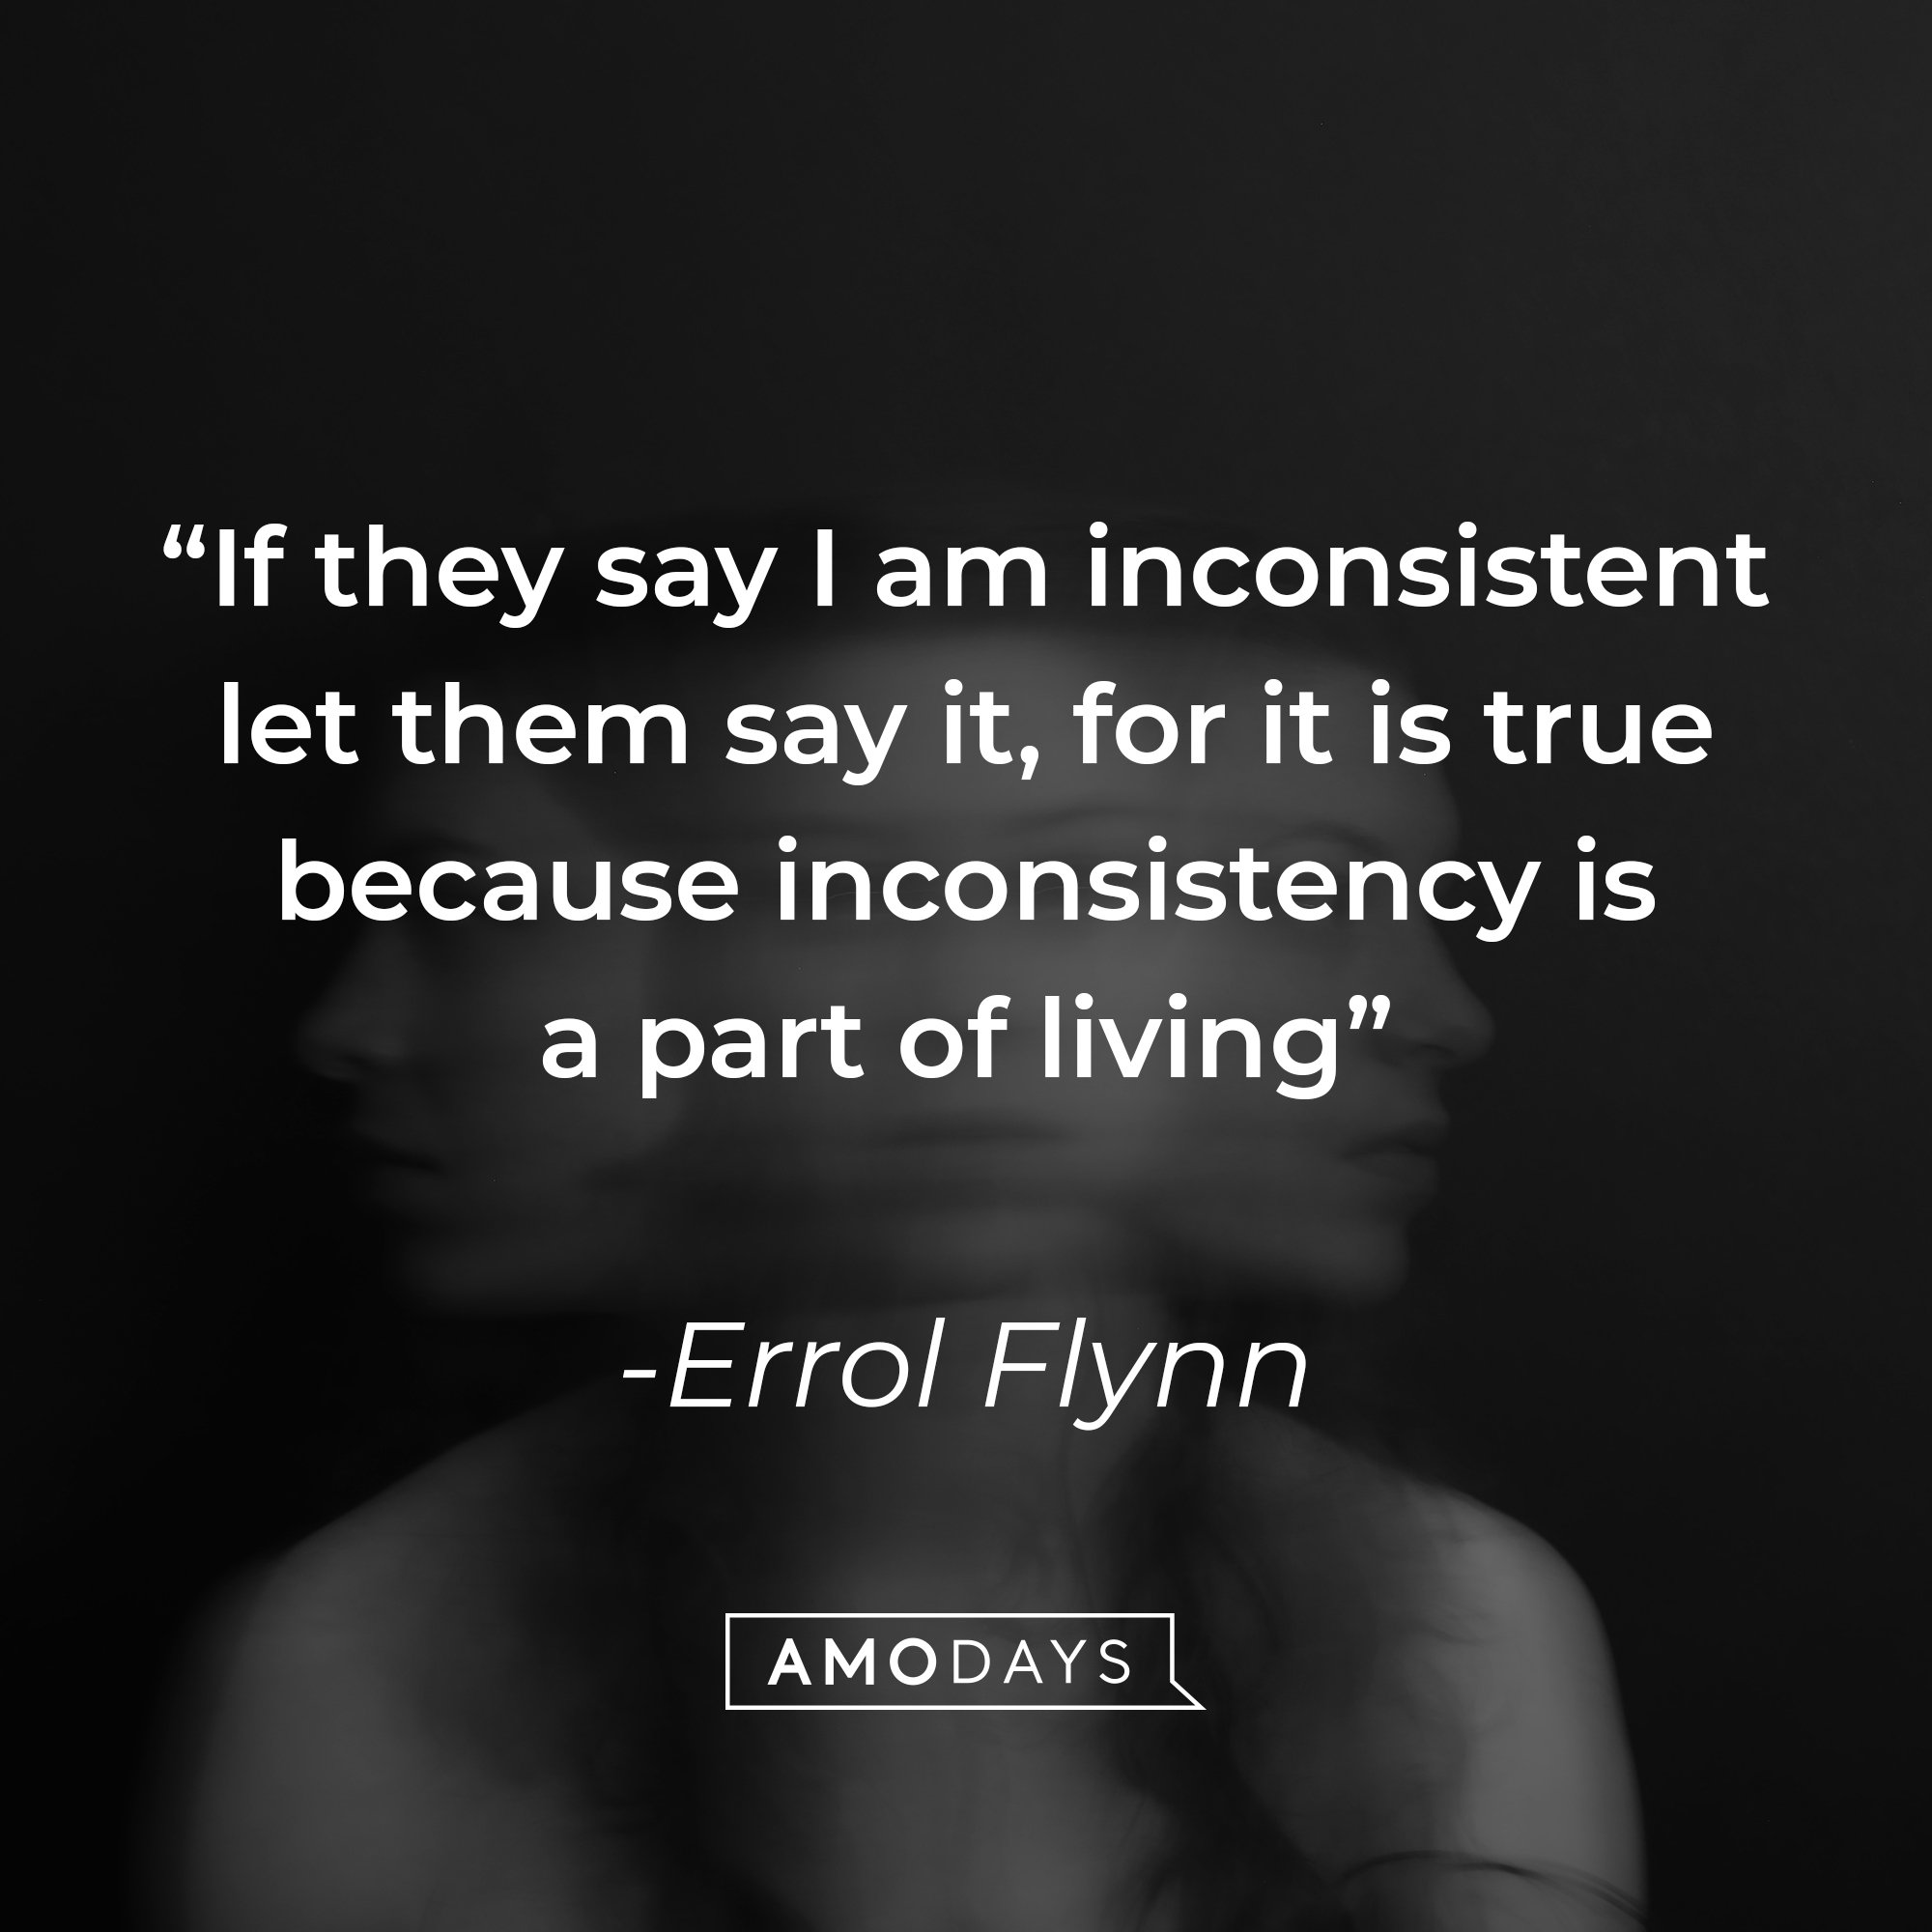 Errol Flynn's quote: "If they say I am inconsistent let them say it, for it is true because inconsistency is a part of living" | Image: AmoDays